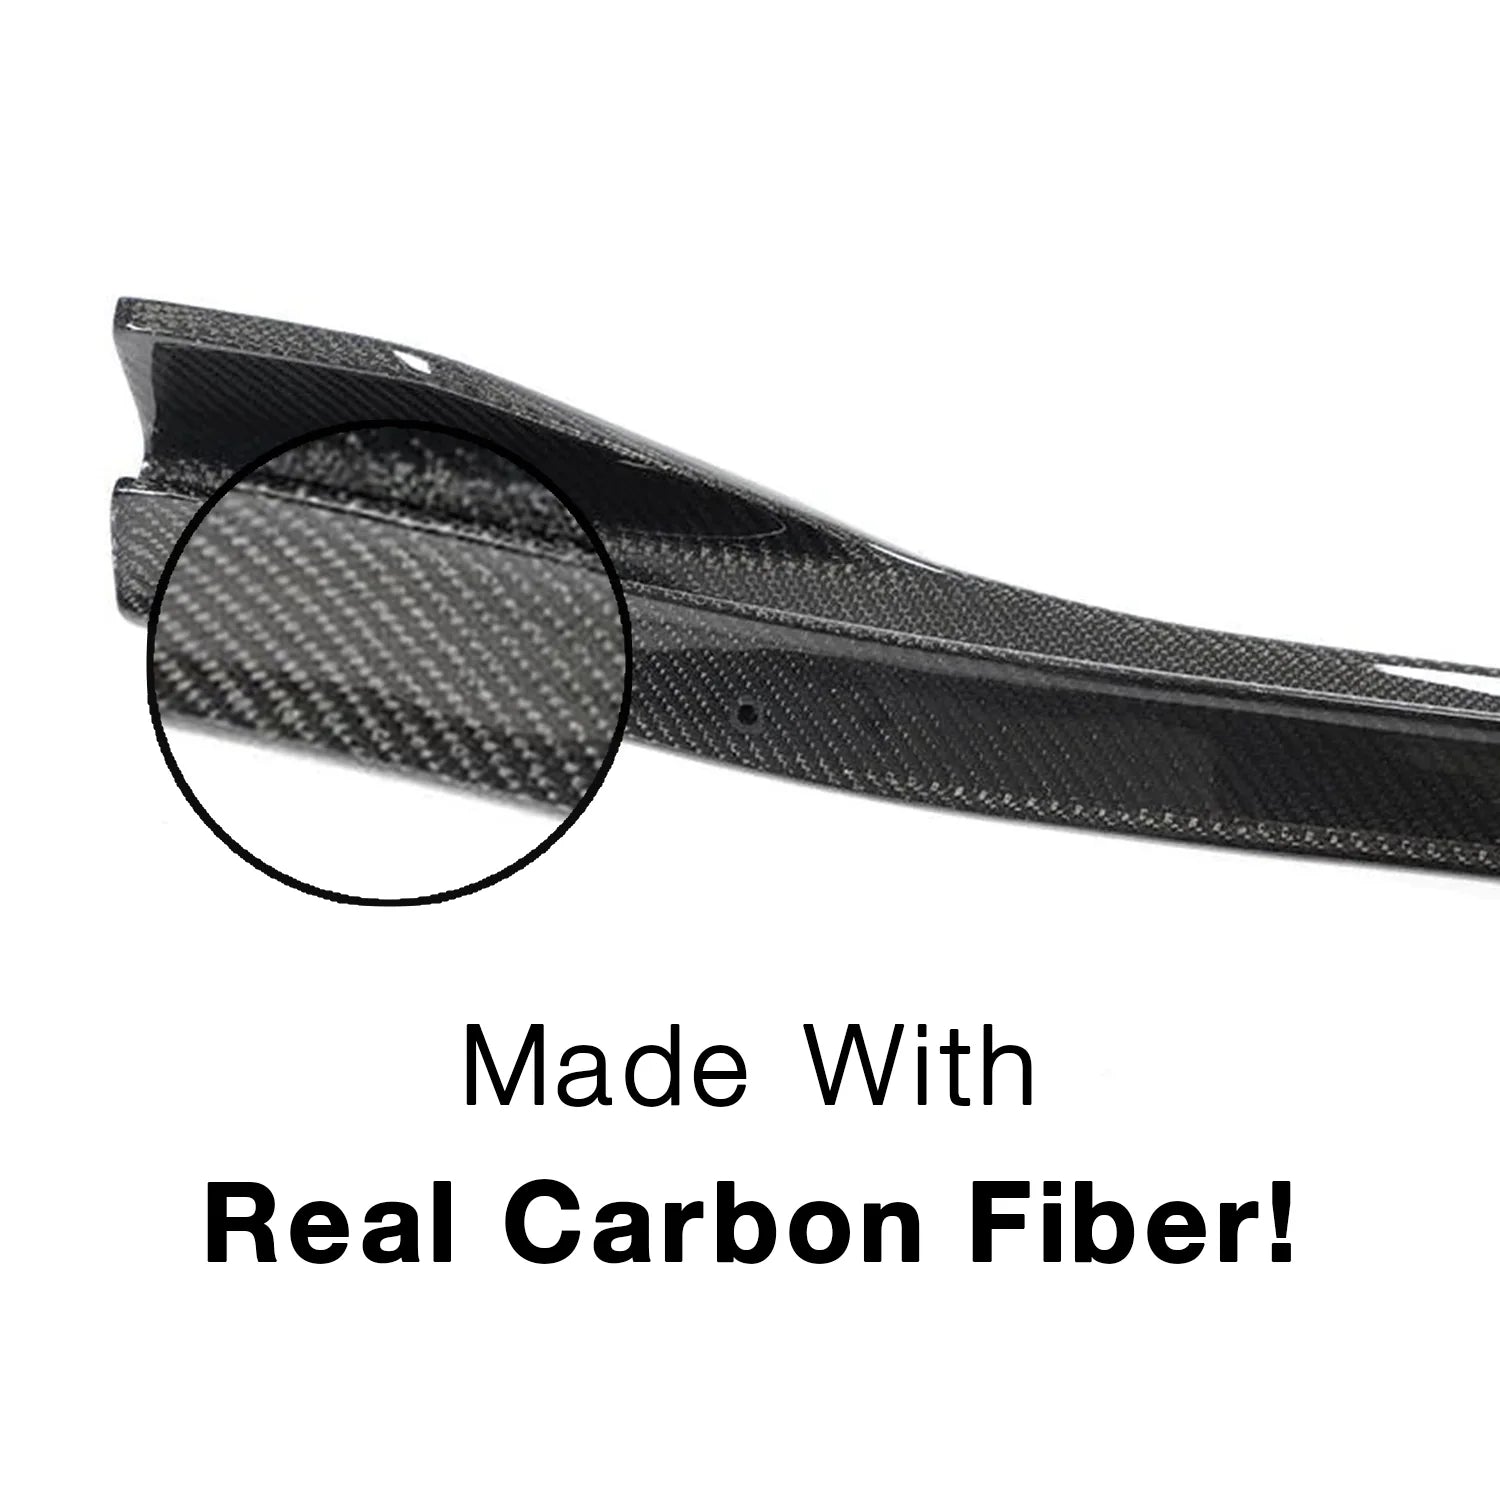 Upgrade Your Tesla Model 3 with Adreama's V Type/Shape Side Skirt Made from Real Carbon Fiber